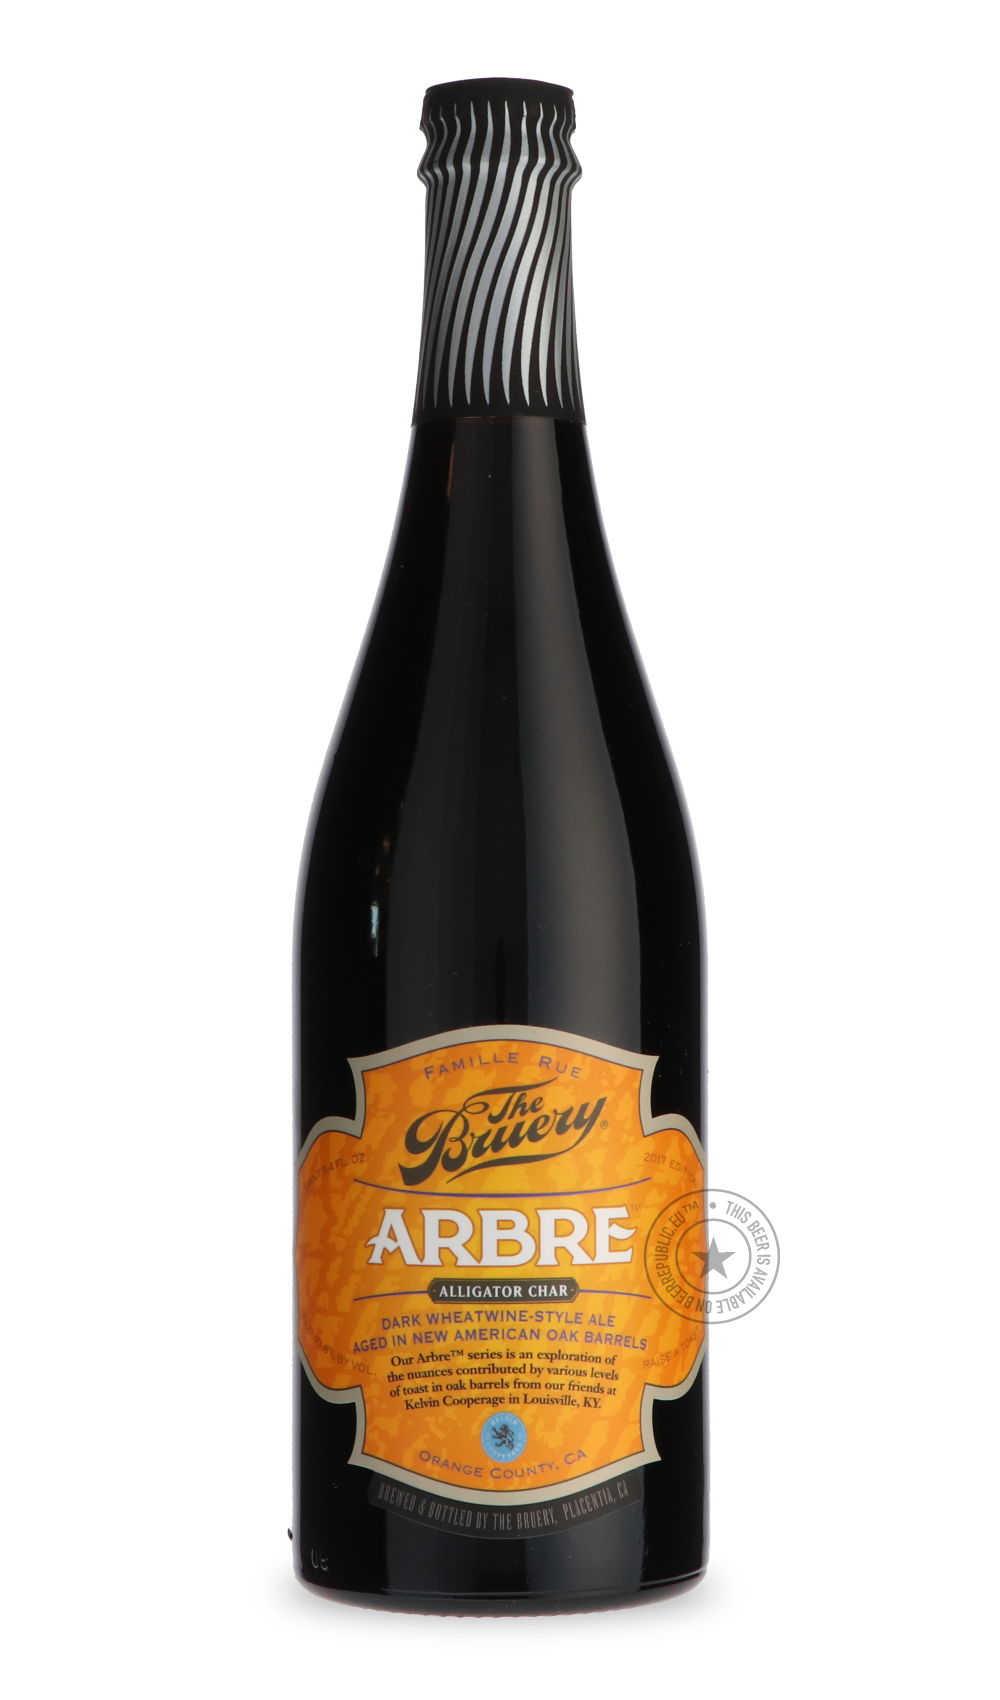 -The Bruery- Arbre Alligator Char-Brown & Dark- Only @ Beer Republic - The best online beer store for American & Canadian craft beer - Buy beer online from the USA and Canada - Bier online kopen - Amerikaans bier kopen - Craft beer store - Craft beer kopen - Amerikanisch bier kaufen - Bier online kaufen - Acheter biere online - IPA - Stout - Porter - New England IPA - Hazy IPA - Imperial Stout - Barrel Aged - Barrel Aged Imperial Stout - Brown - Dark beer - Blond - Blonde - Pilsner - Lager - Wheat - Weizen 